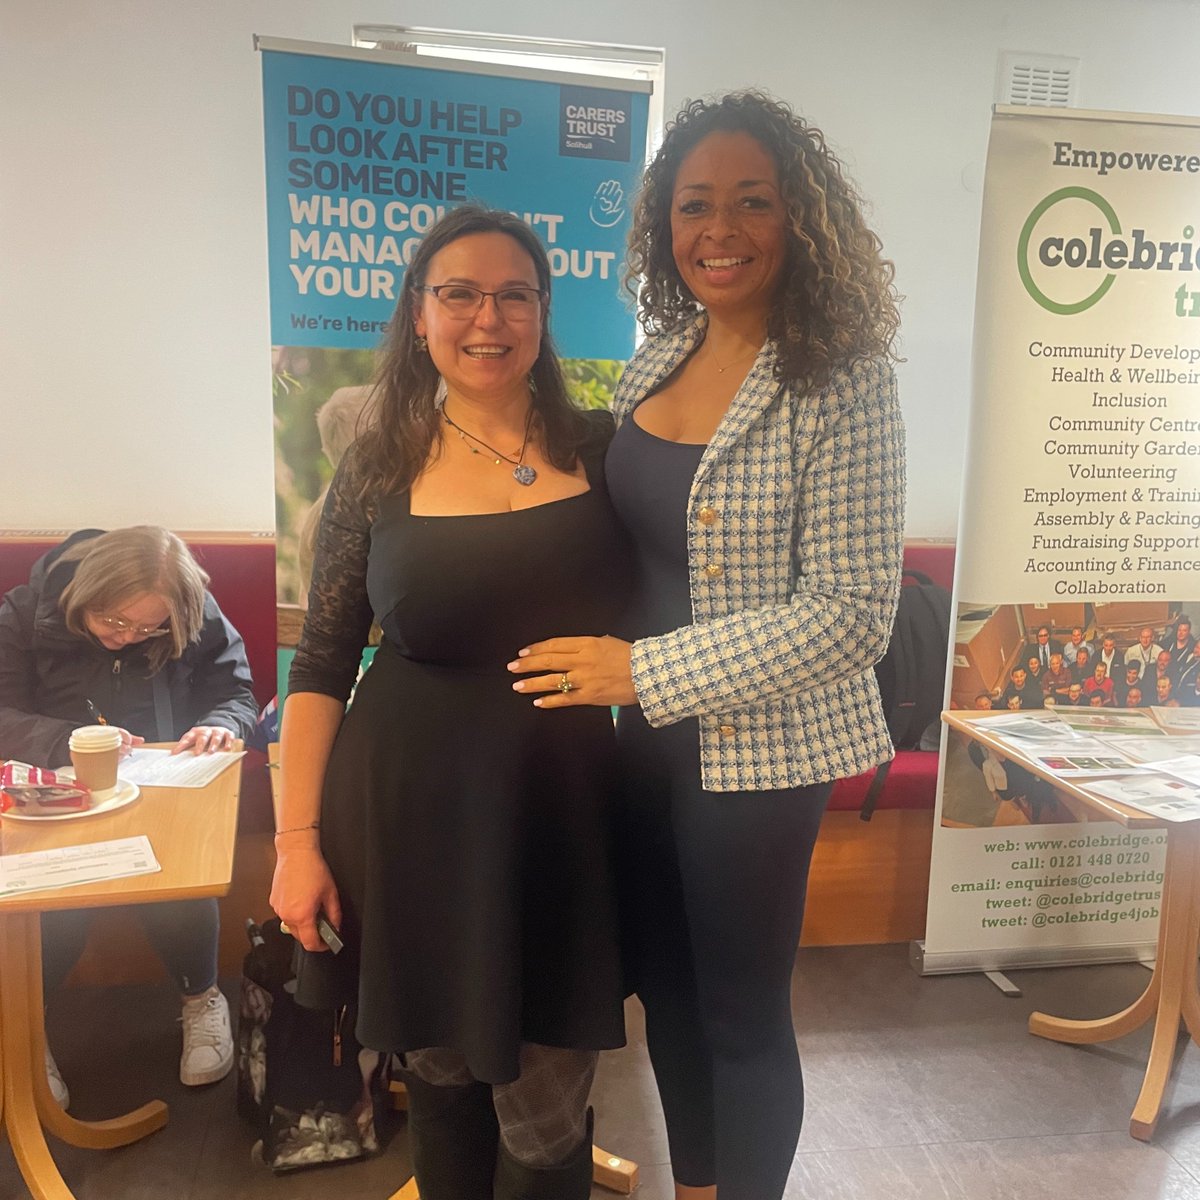 Our Fundraising manager Pauline did some outreach work with @MenoKnowledge yesterday. Thank you @Alineboblin for letting us come along and spread awareness of our service. #carers #solihull #menopauseKnowledge #wellbeing